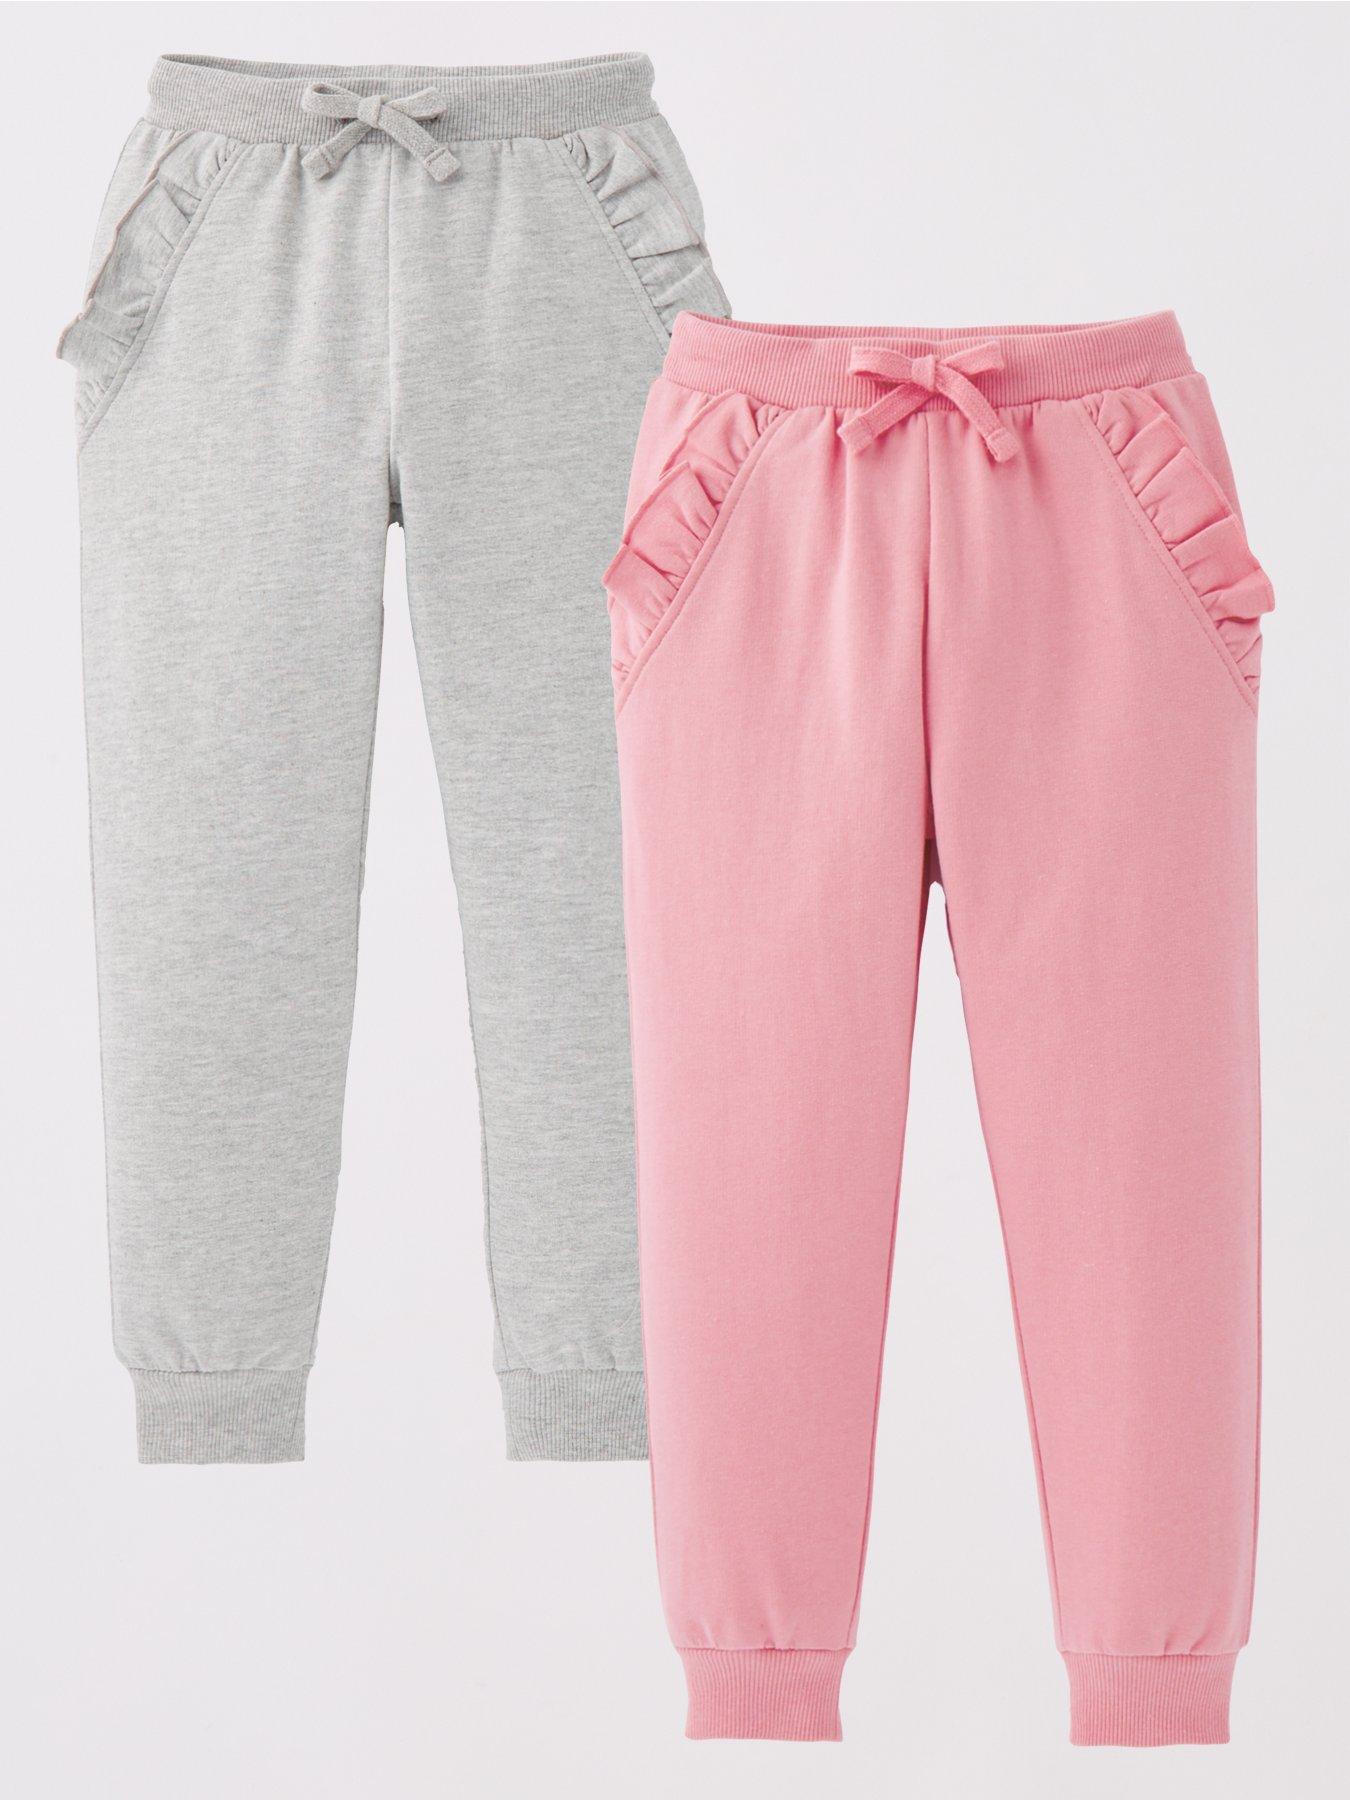 Girls Trackpants & Joggers | Sizes Age 2 to 13 | Pineapple